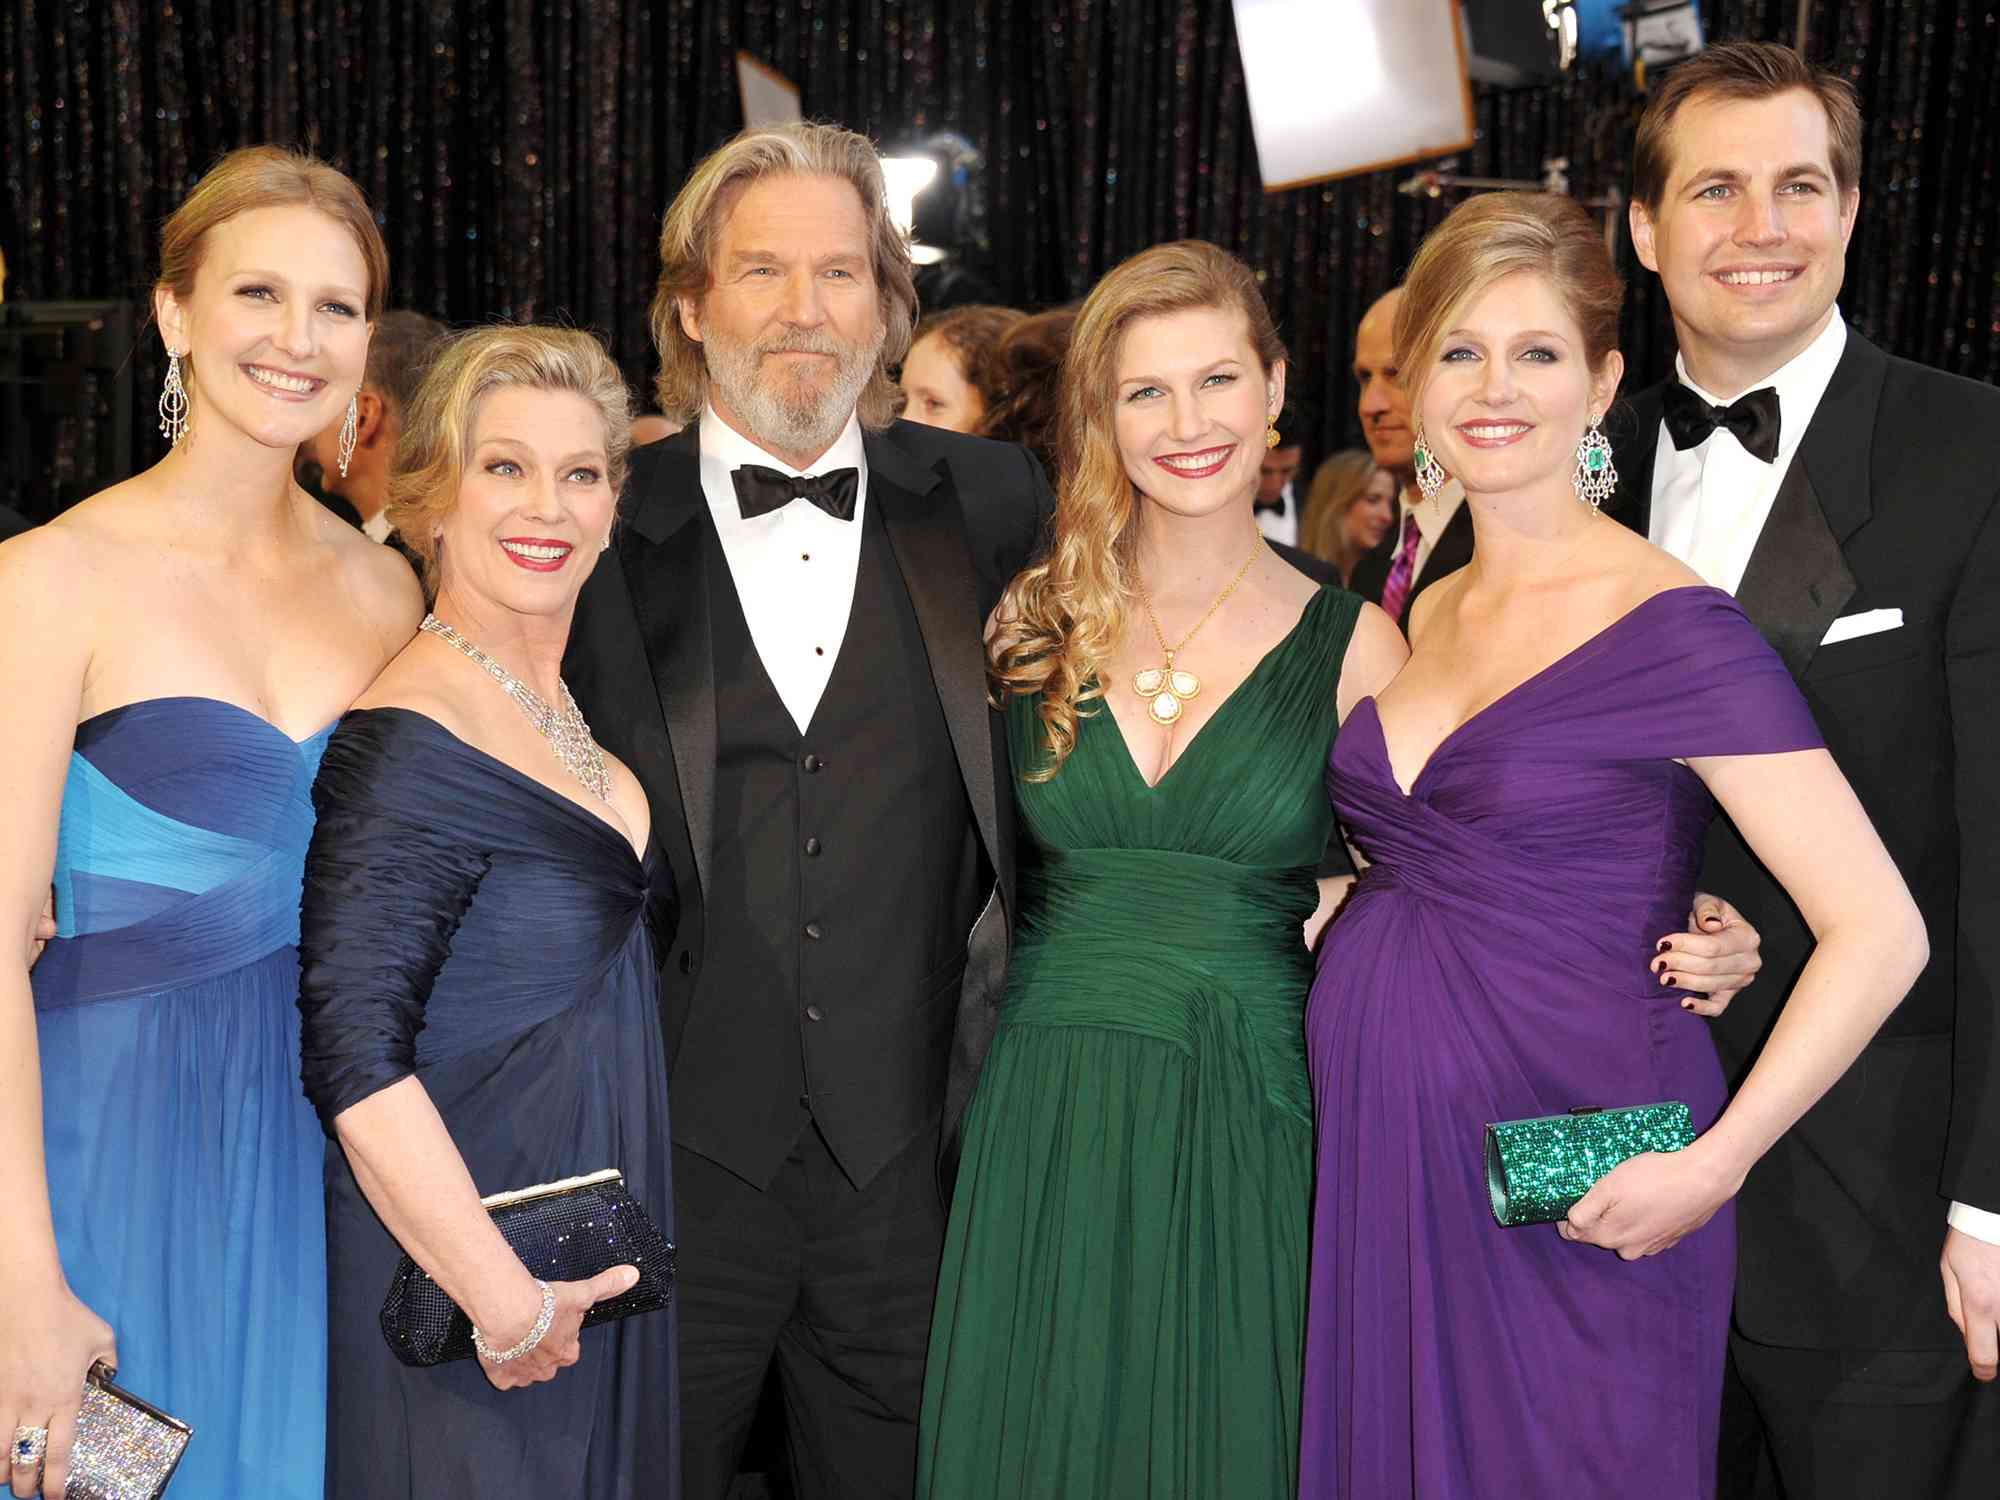 Jeff Bridges (C), wife Susan Bridges (2nd L) and family arrive at the 83rd Annual Academy Awards held at the Kodak Theatre on February 27, 2011 in Hollywood, California